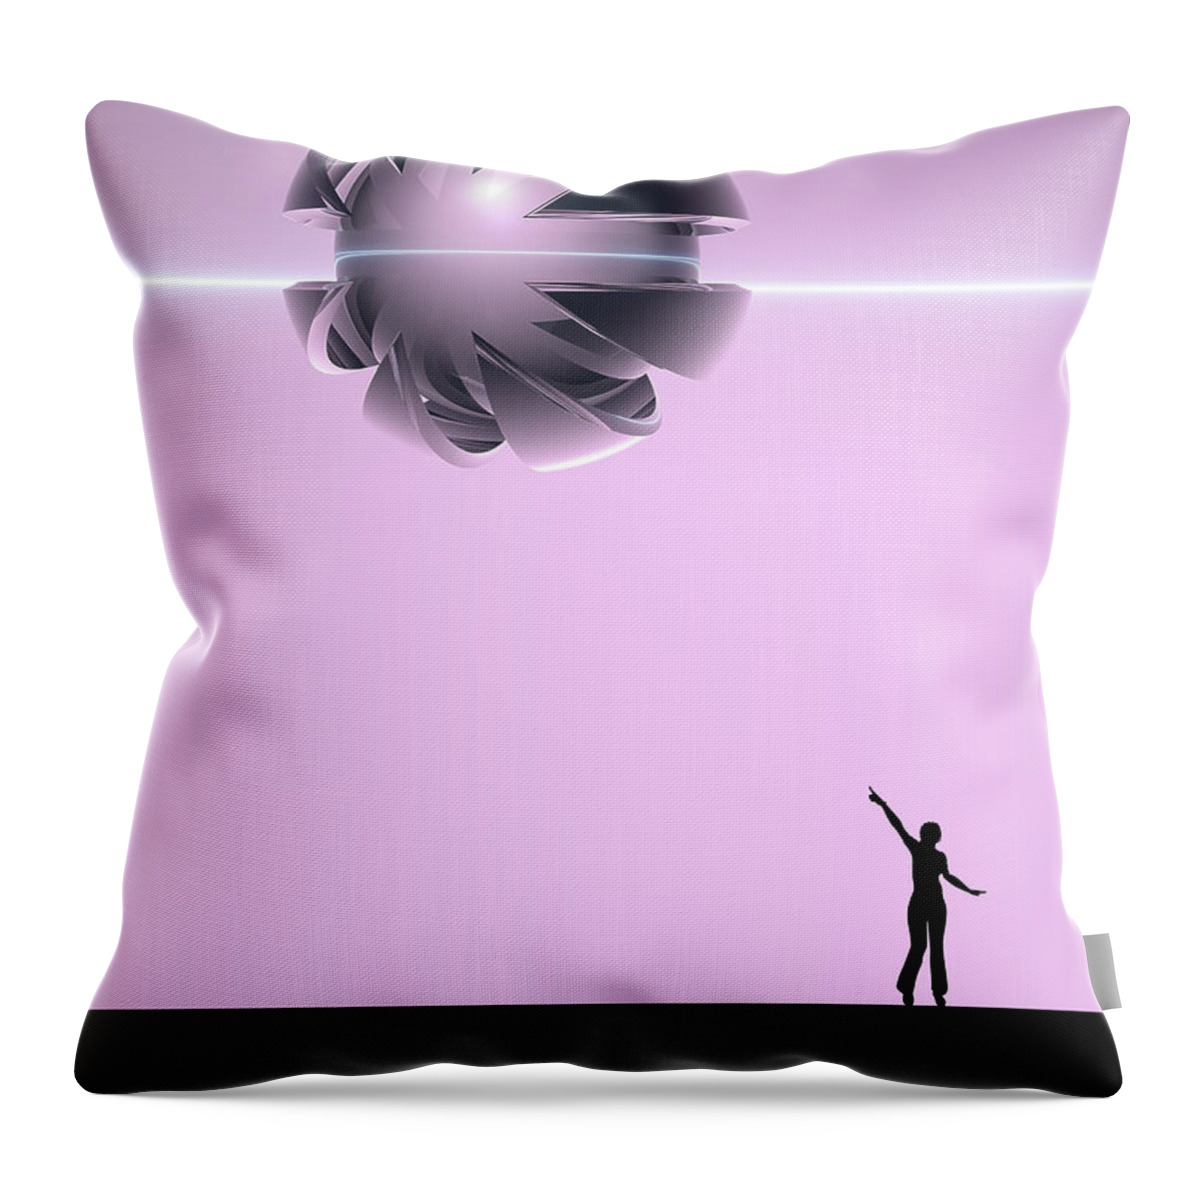 Ufo Throw Pillow featuring the digital art Spaceship In The Sky by Phil Perkins